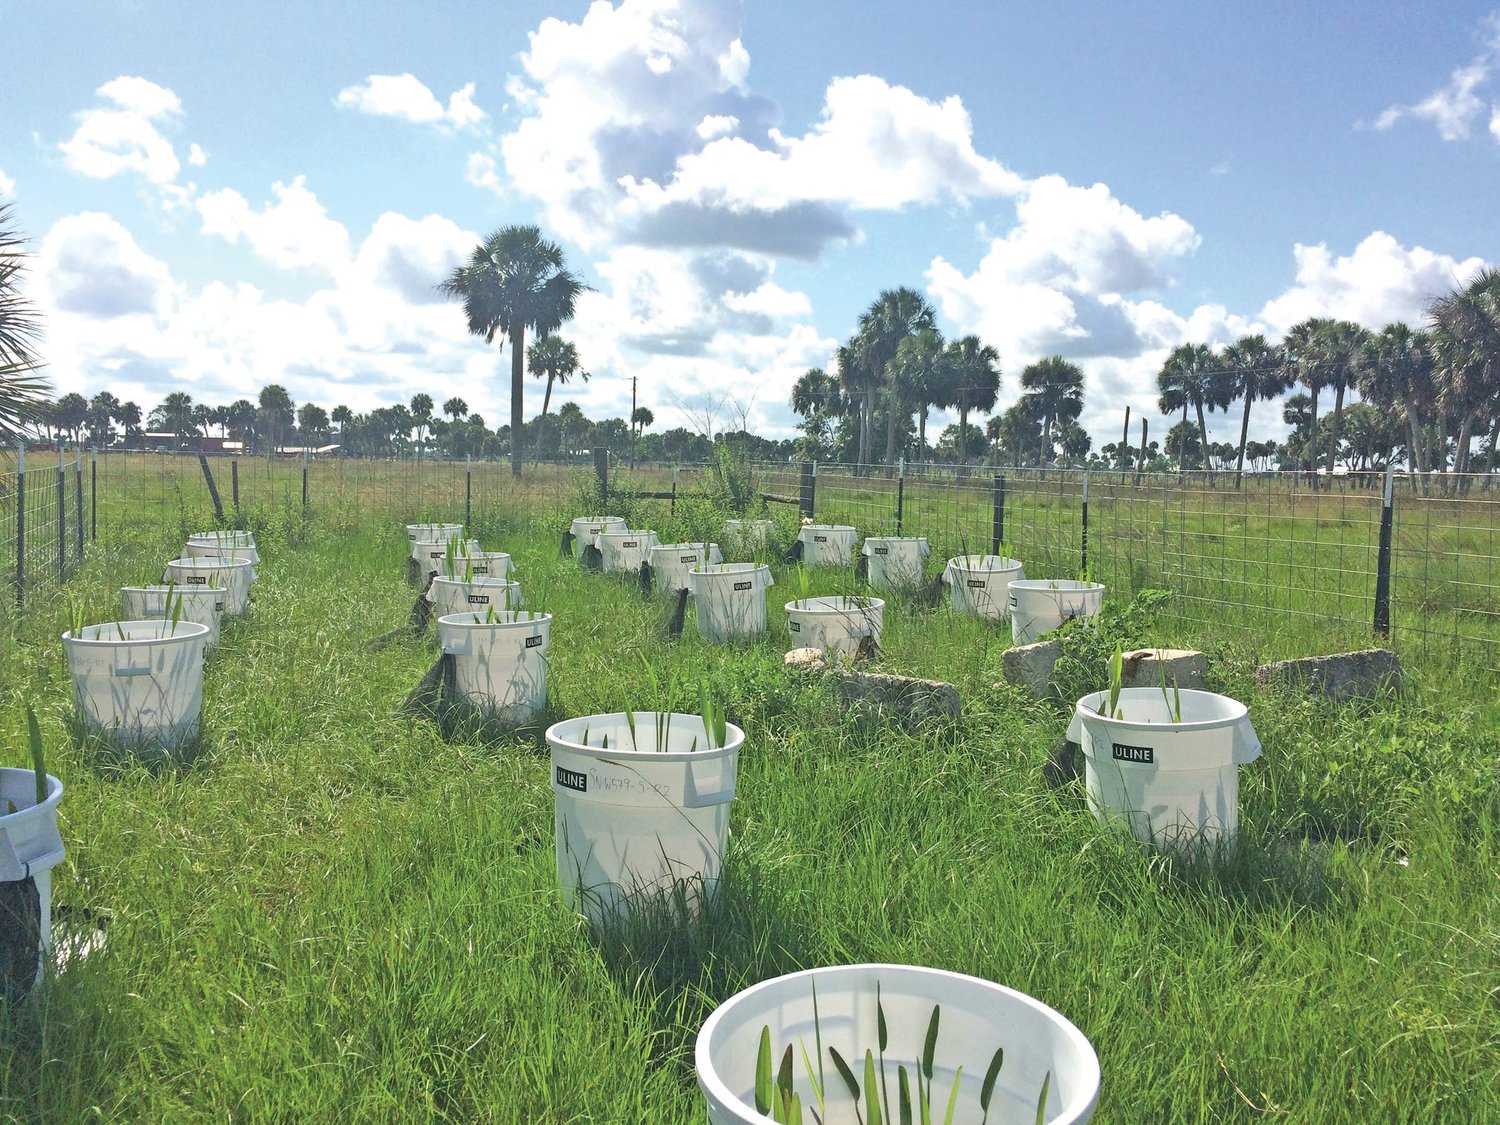 The mesocosm experiment site at the Archbold Biological Station’s Buck Island Ranch in Highlands County.